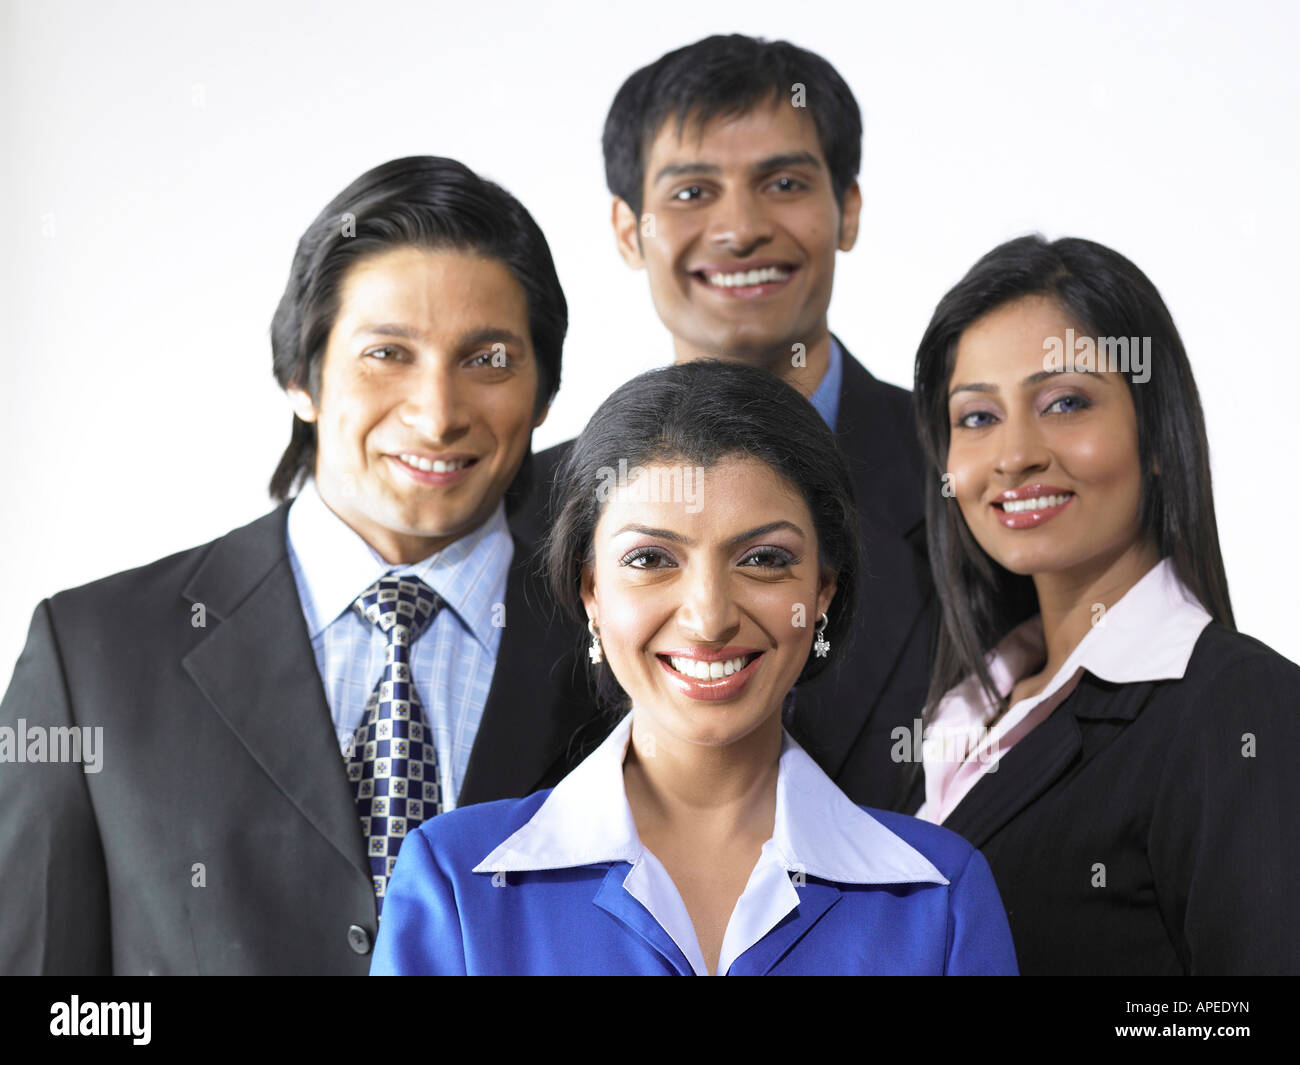 South Asian Indian executive men and women standing together MR Stock Photo